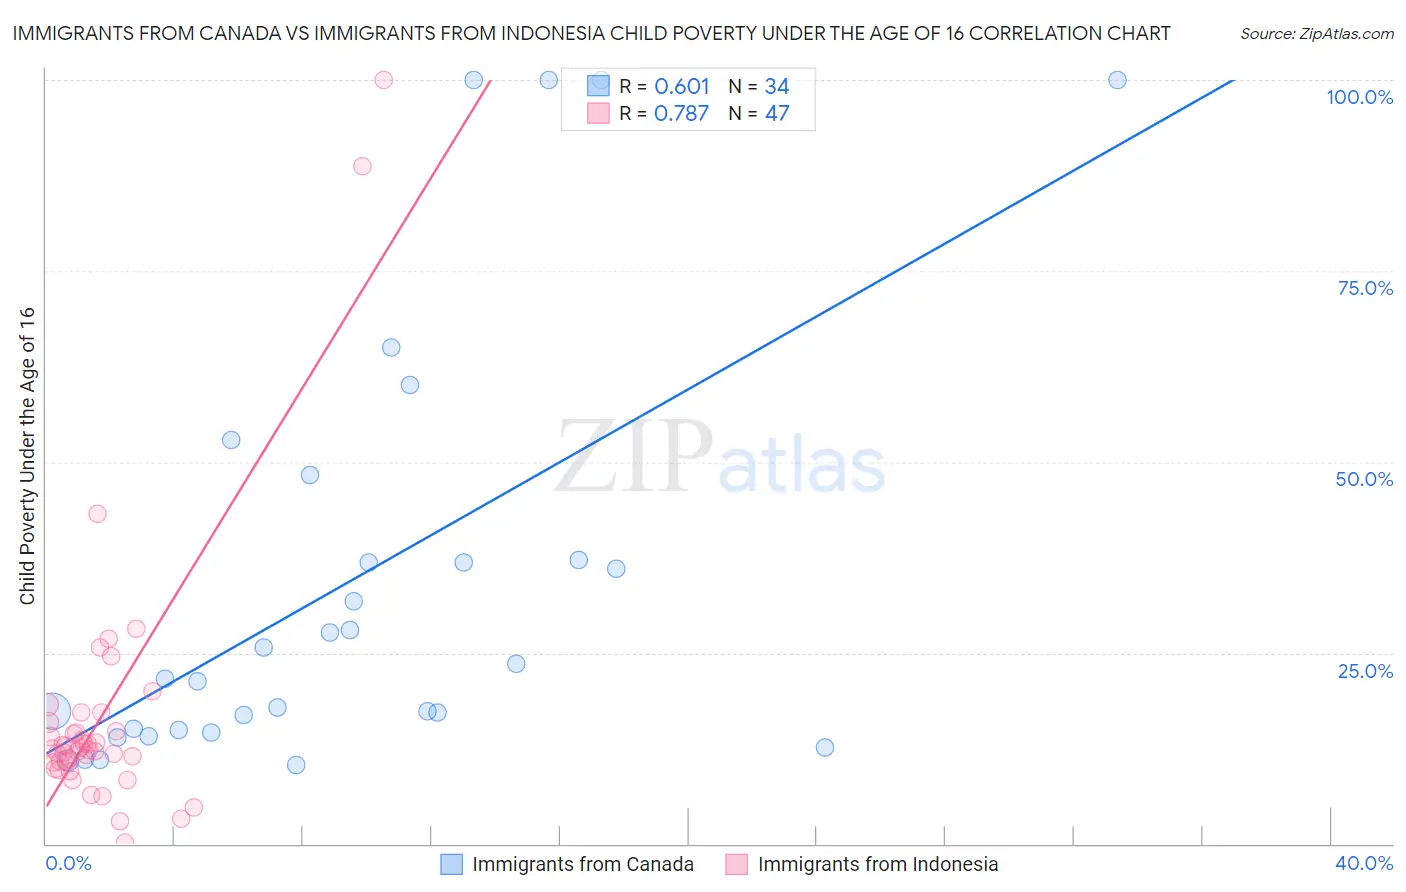 Immigrants from Canada vs Immigrants from Indonesia Child Poverty Under the Age of 16